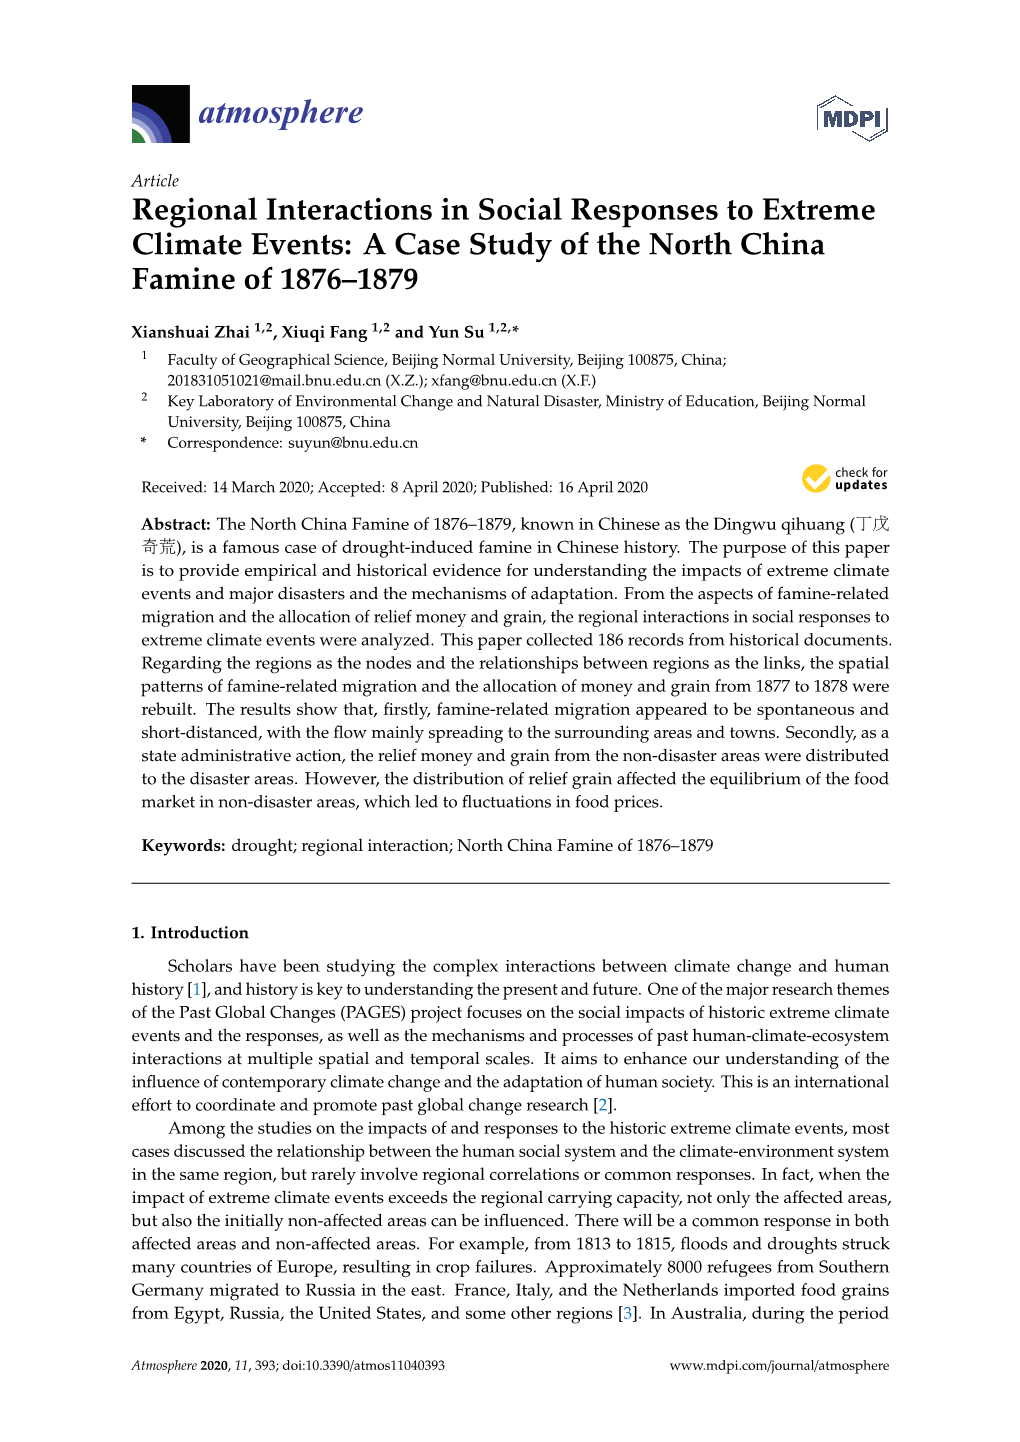 A Case Study of the North China Famine of 1876–1879